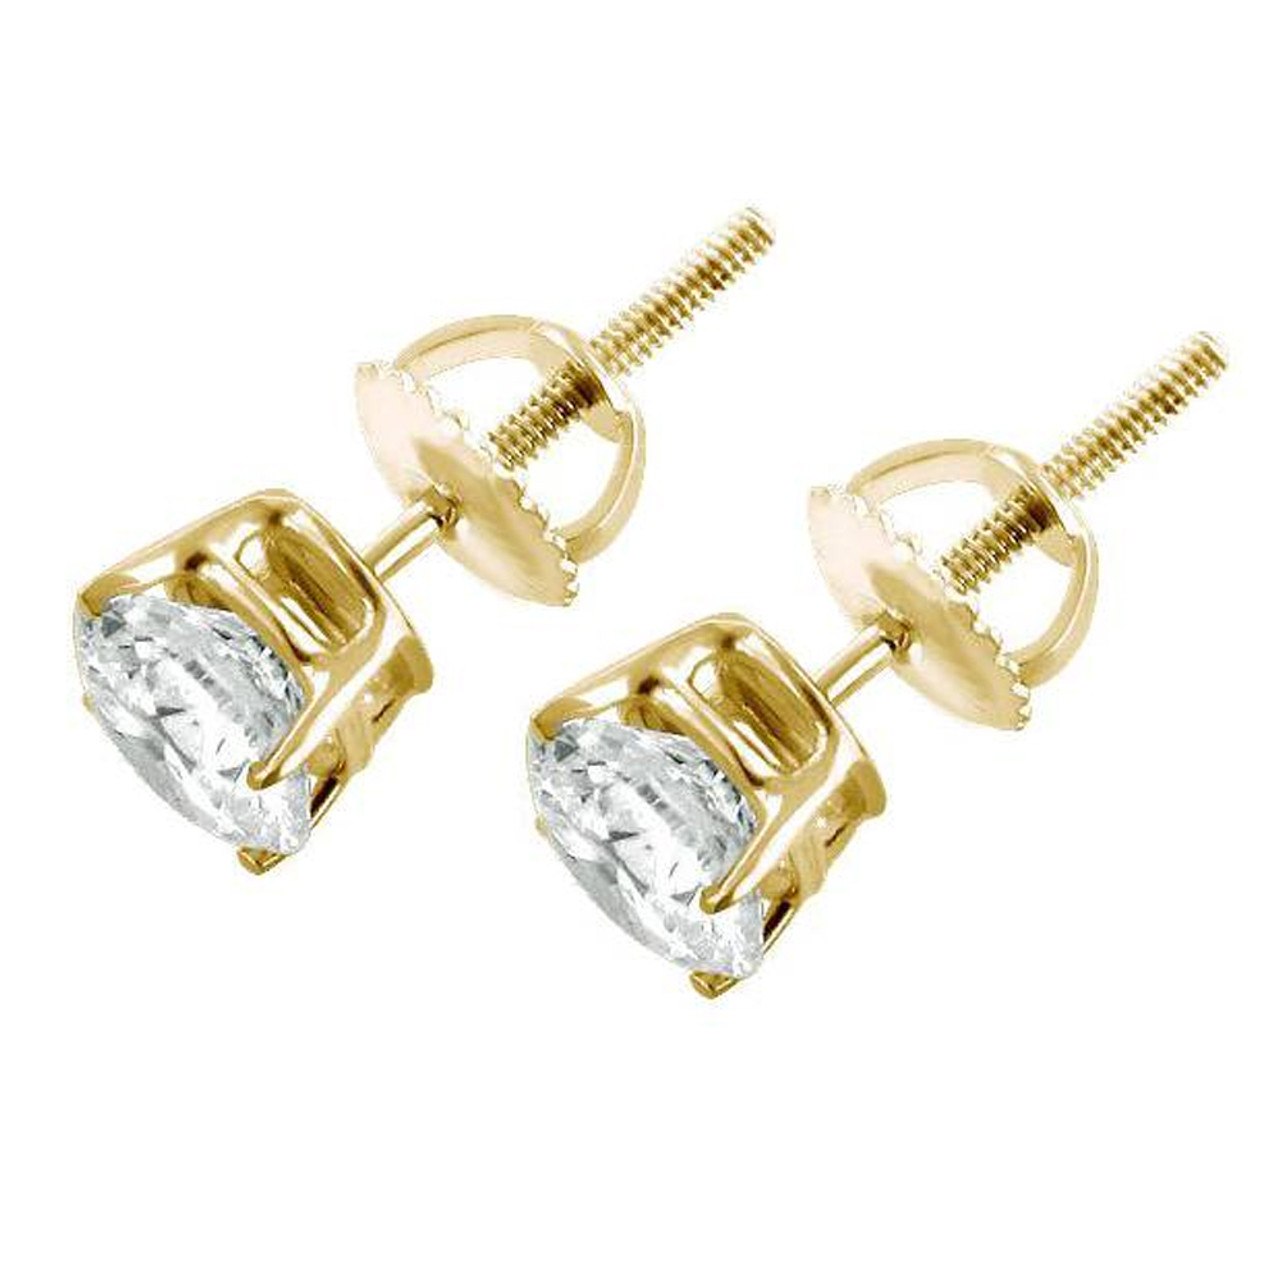 2.00Ct Round Cut Simulated Diamond LV Stud Earrings in 14K Yellow